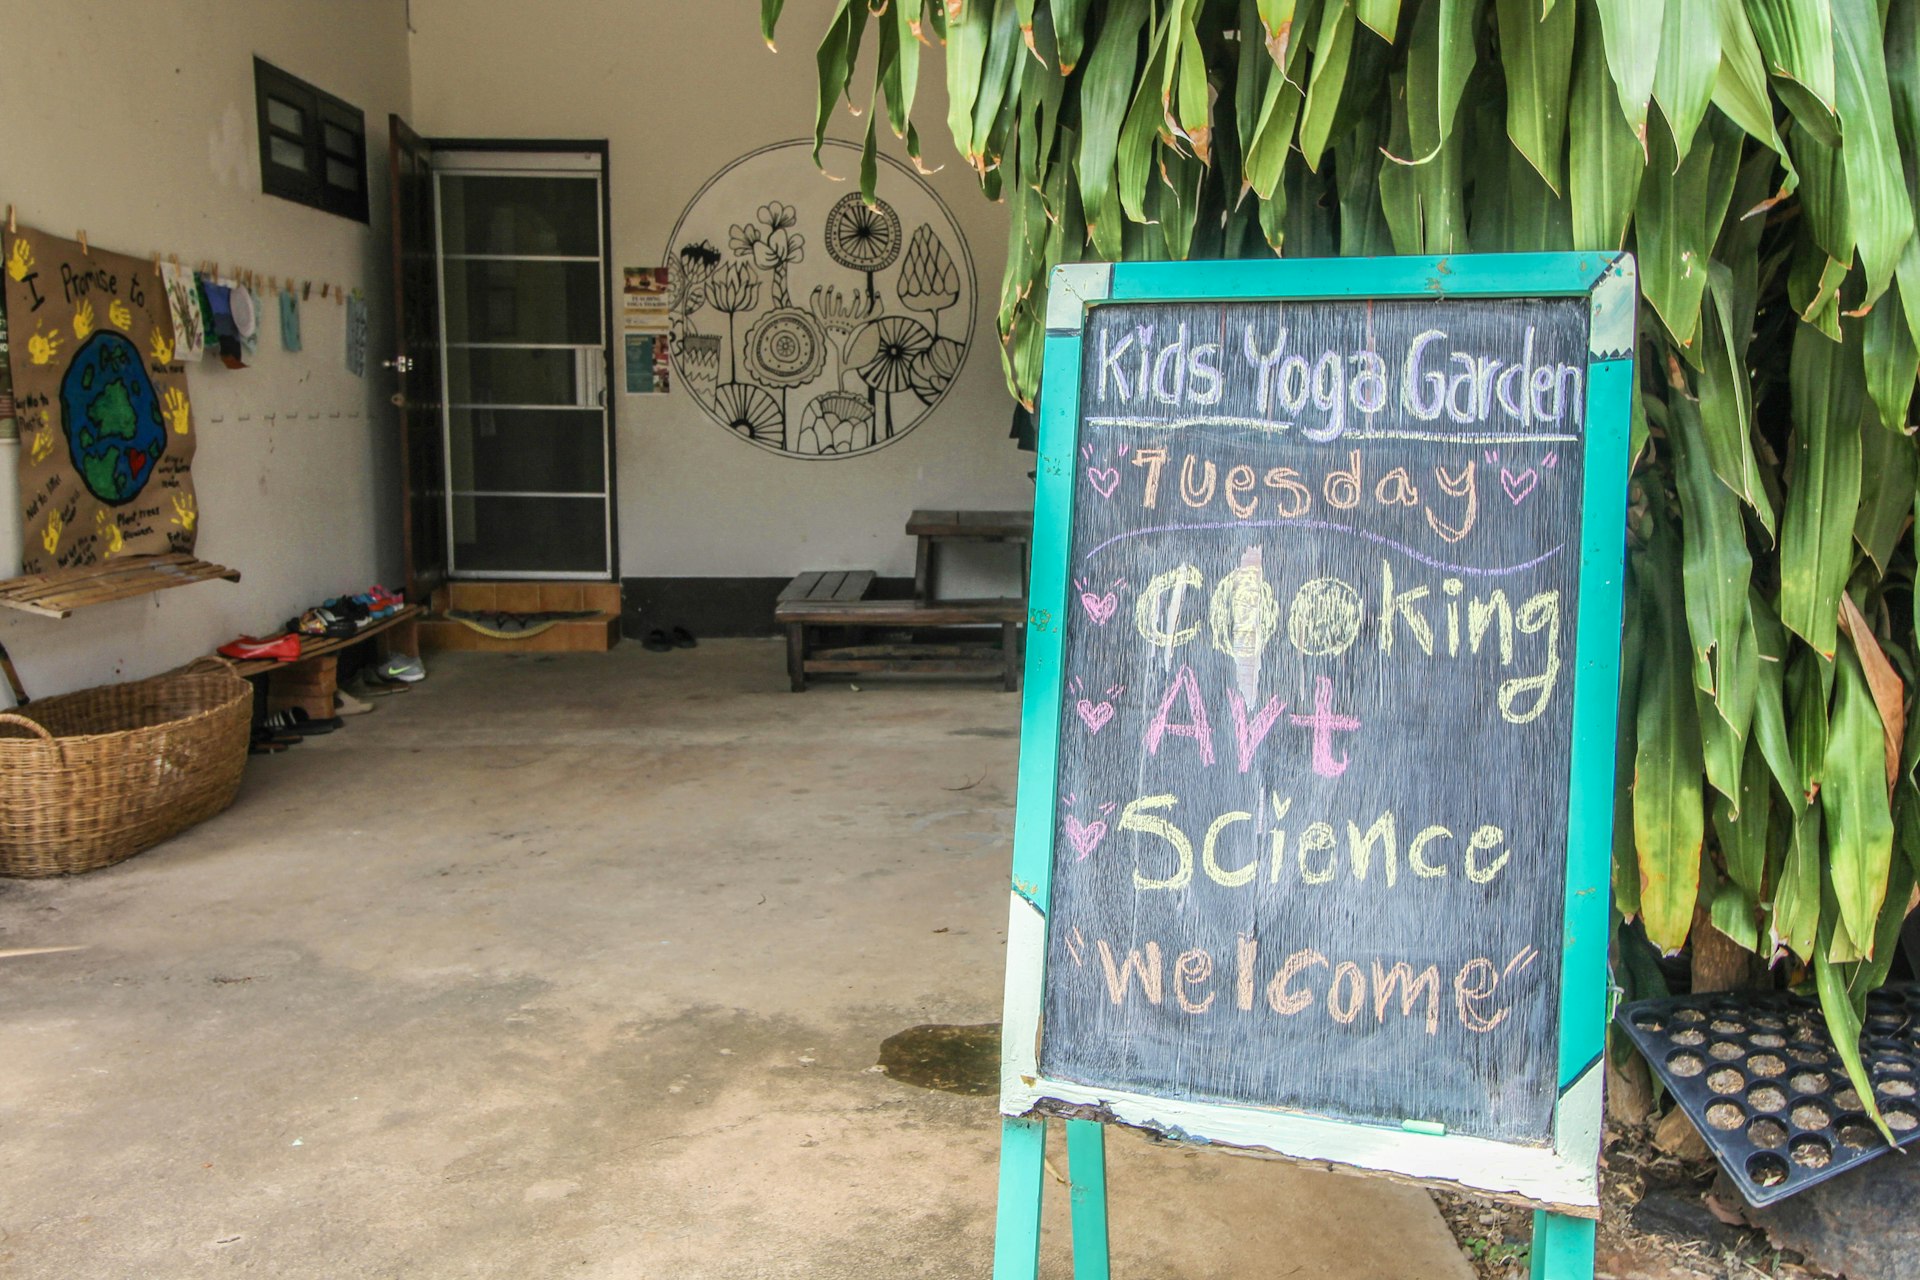 A freestanding black chalkboard sign stands outside a building. The sign reads: "Kids Yoga Garden. Tuesday: cooking, art, science. Welcome".